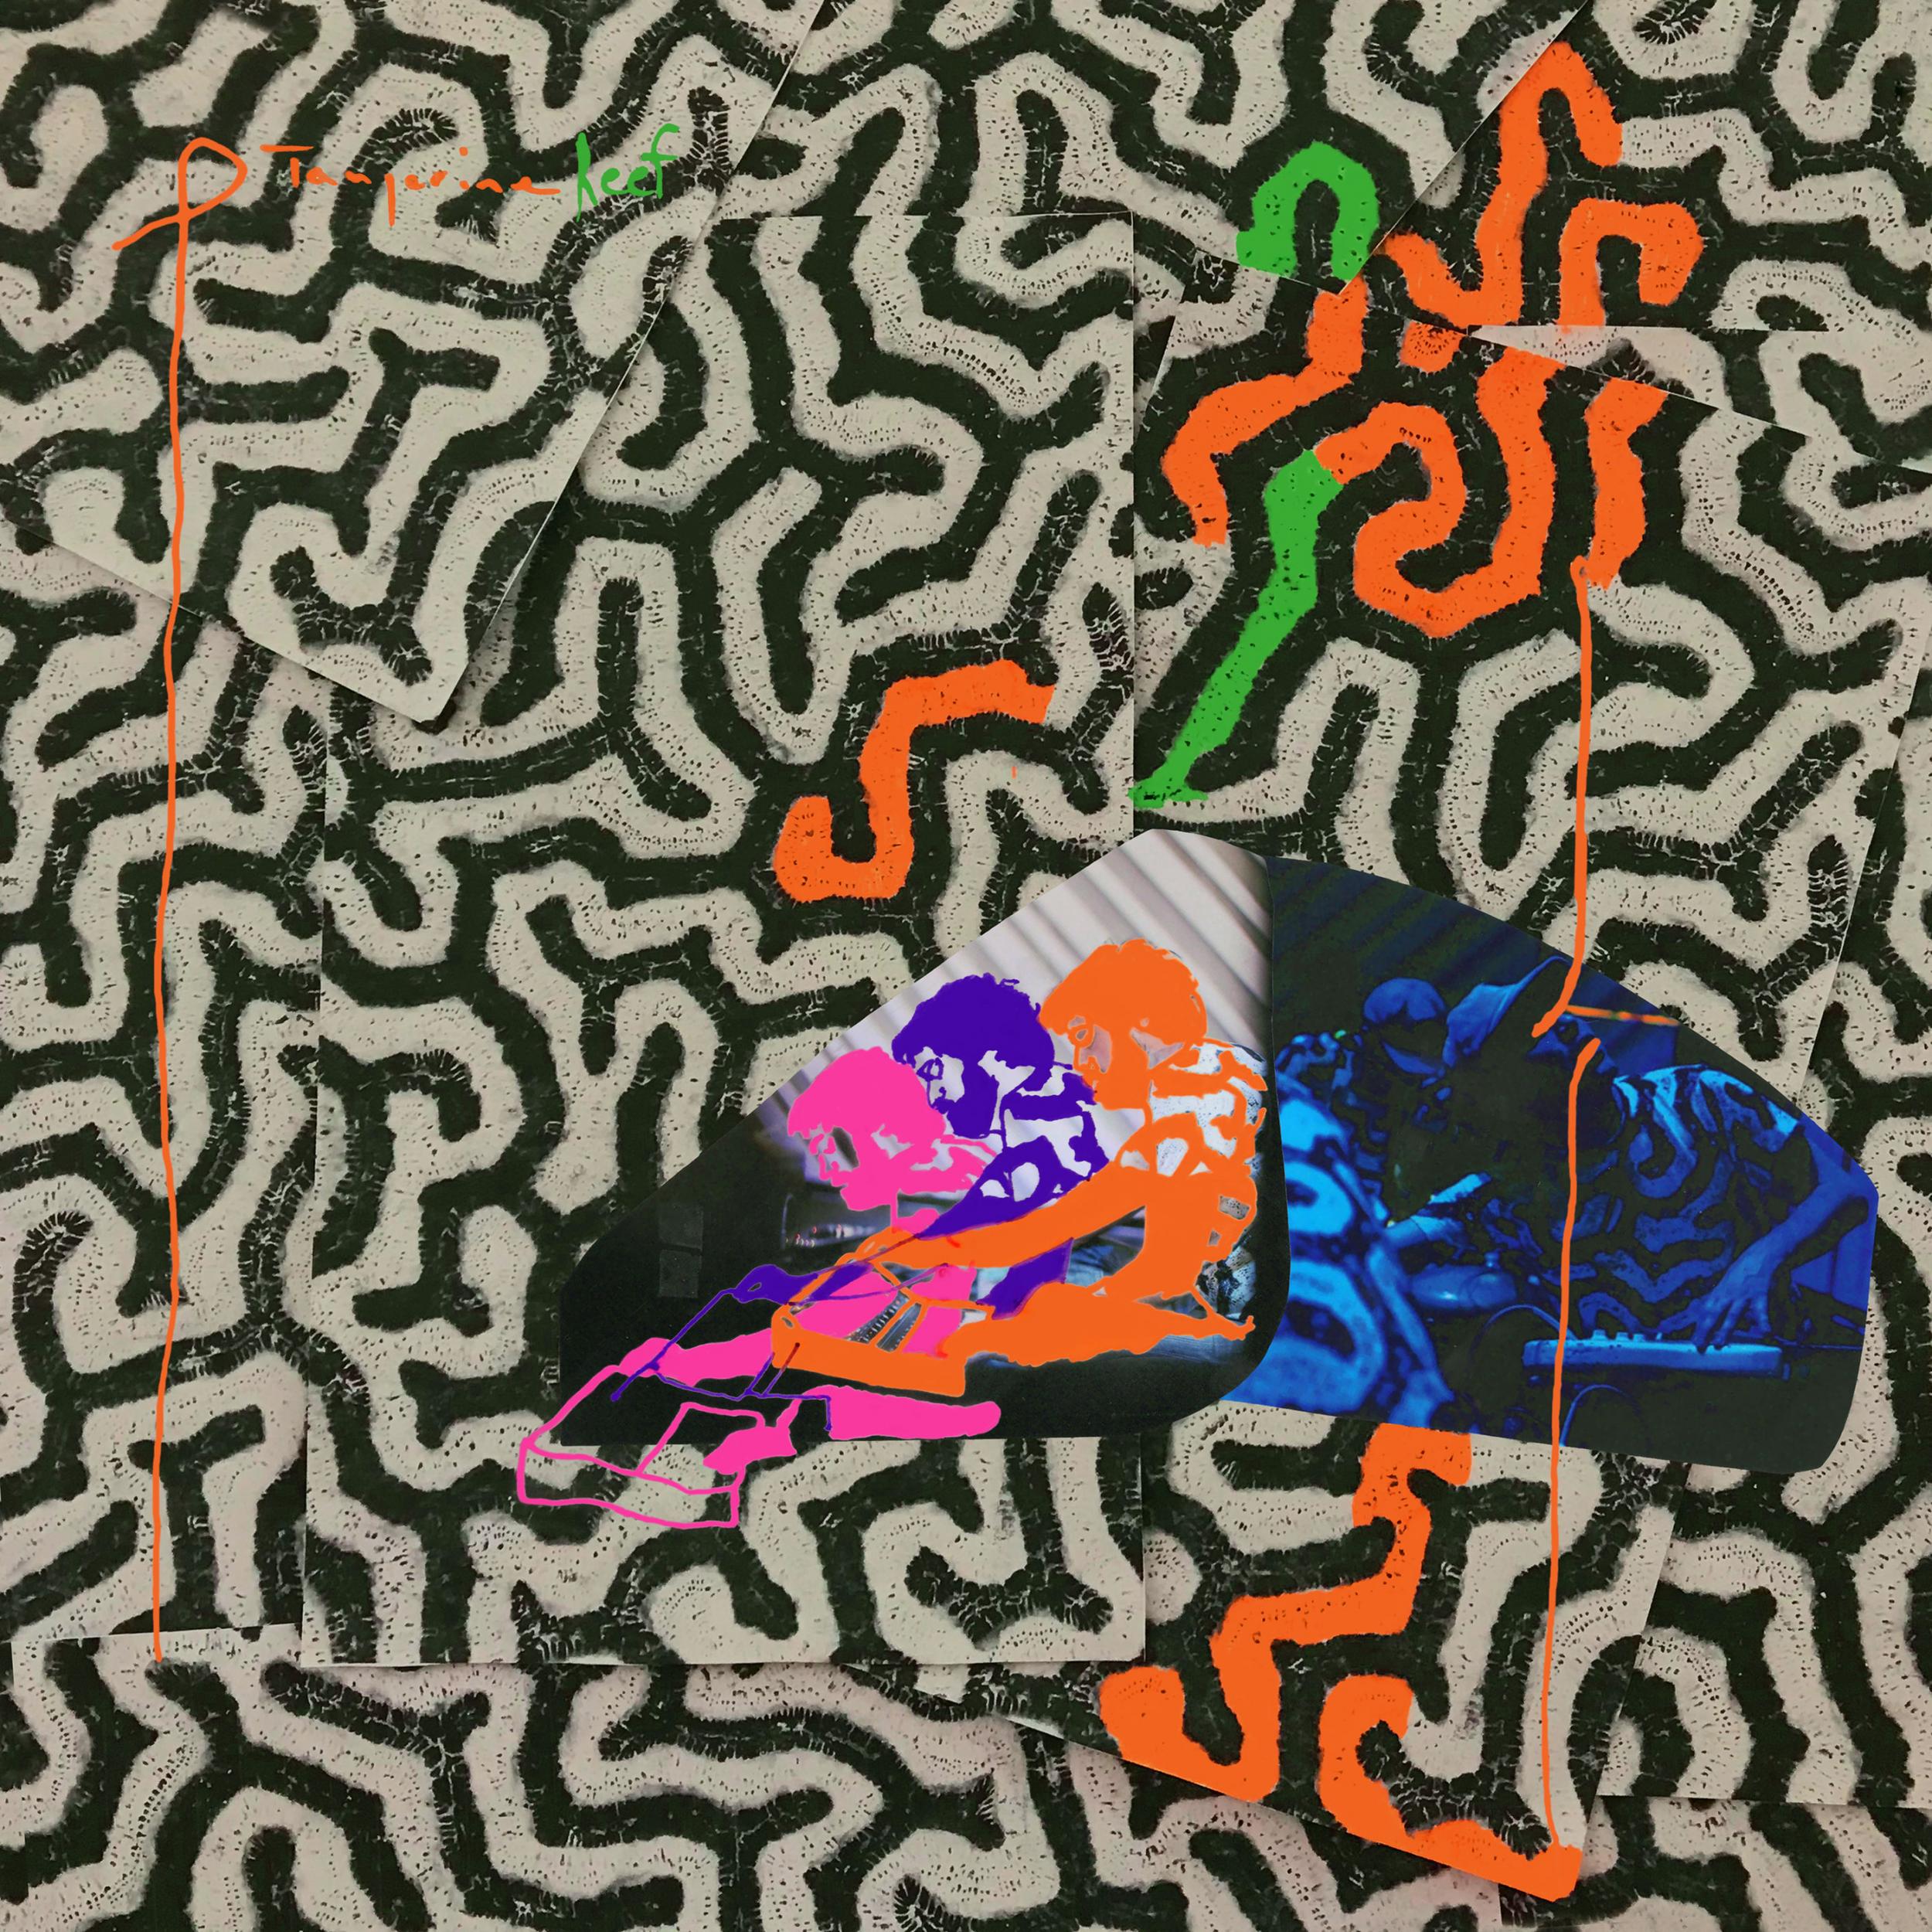 Animal Collective’s ‘Tangerine Reef’: as an environmental art project, it is laudable; as a listening experience, it is impenetrable